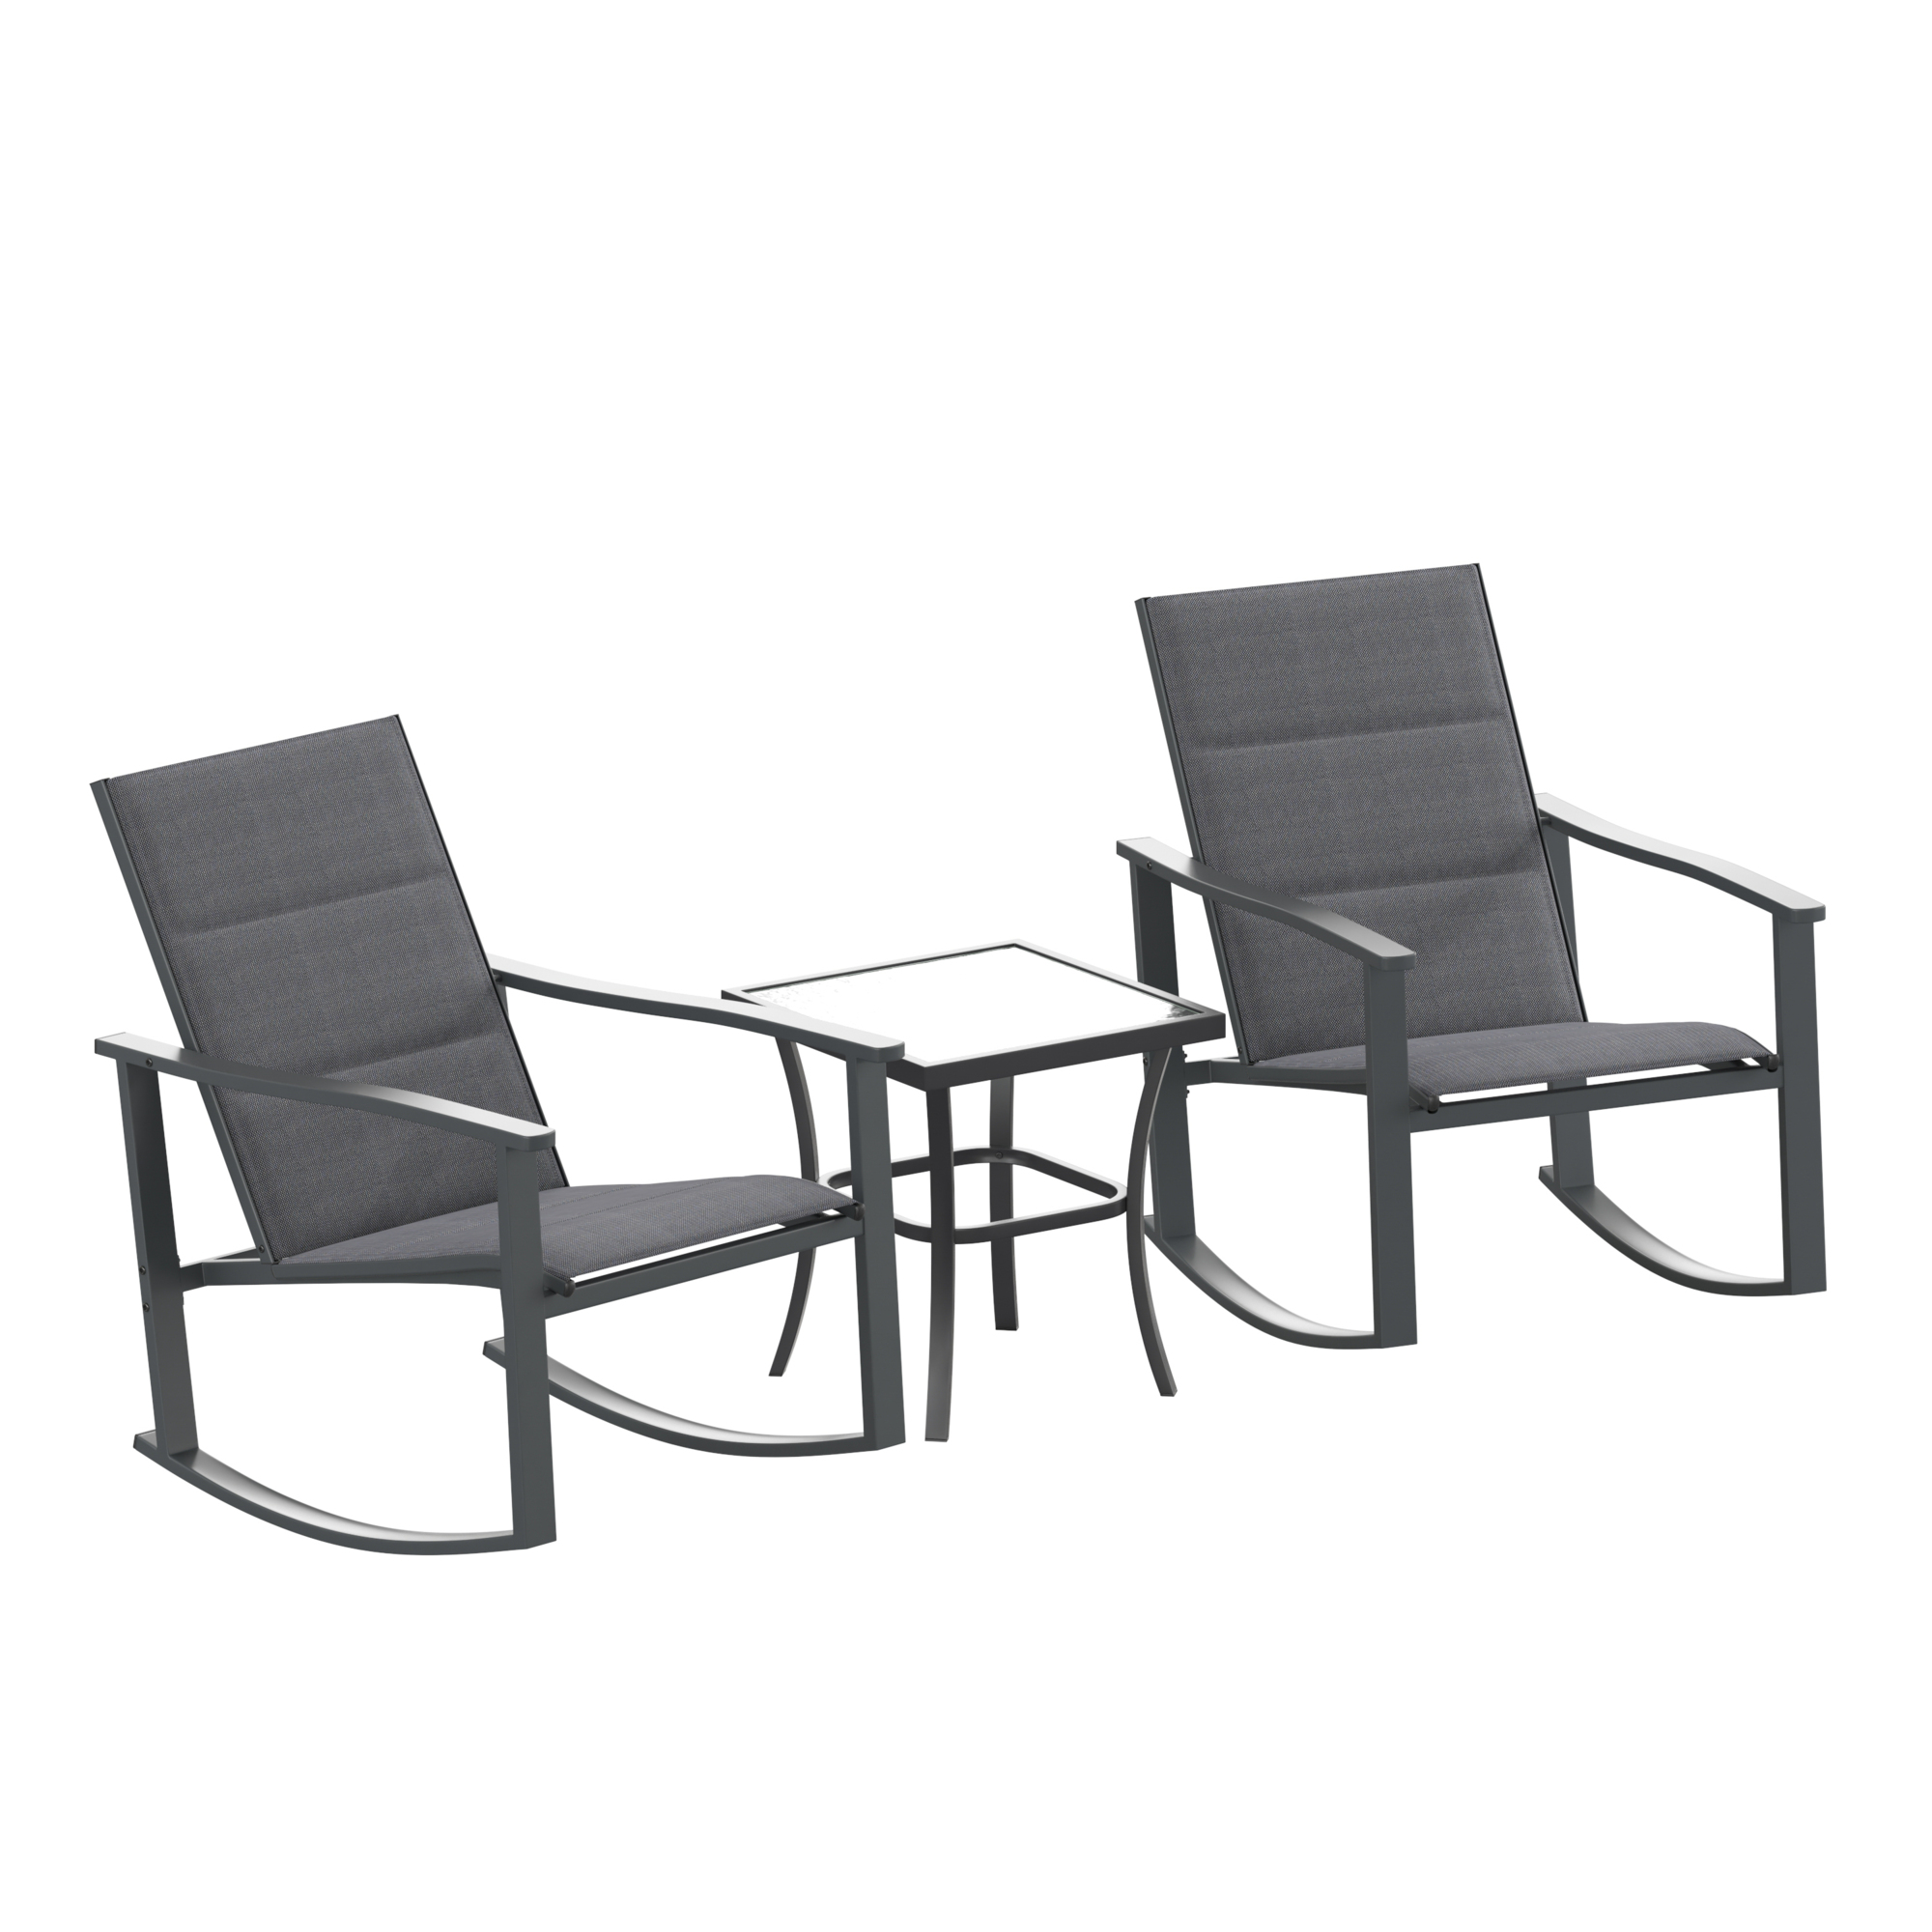 Flash Furniture, Black 3 Piece Rocking Chair and Side Table Set, Pieces (qty.) 3 Primary Color Black, Seating Capacity 2 Model FVFSC2315BLK